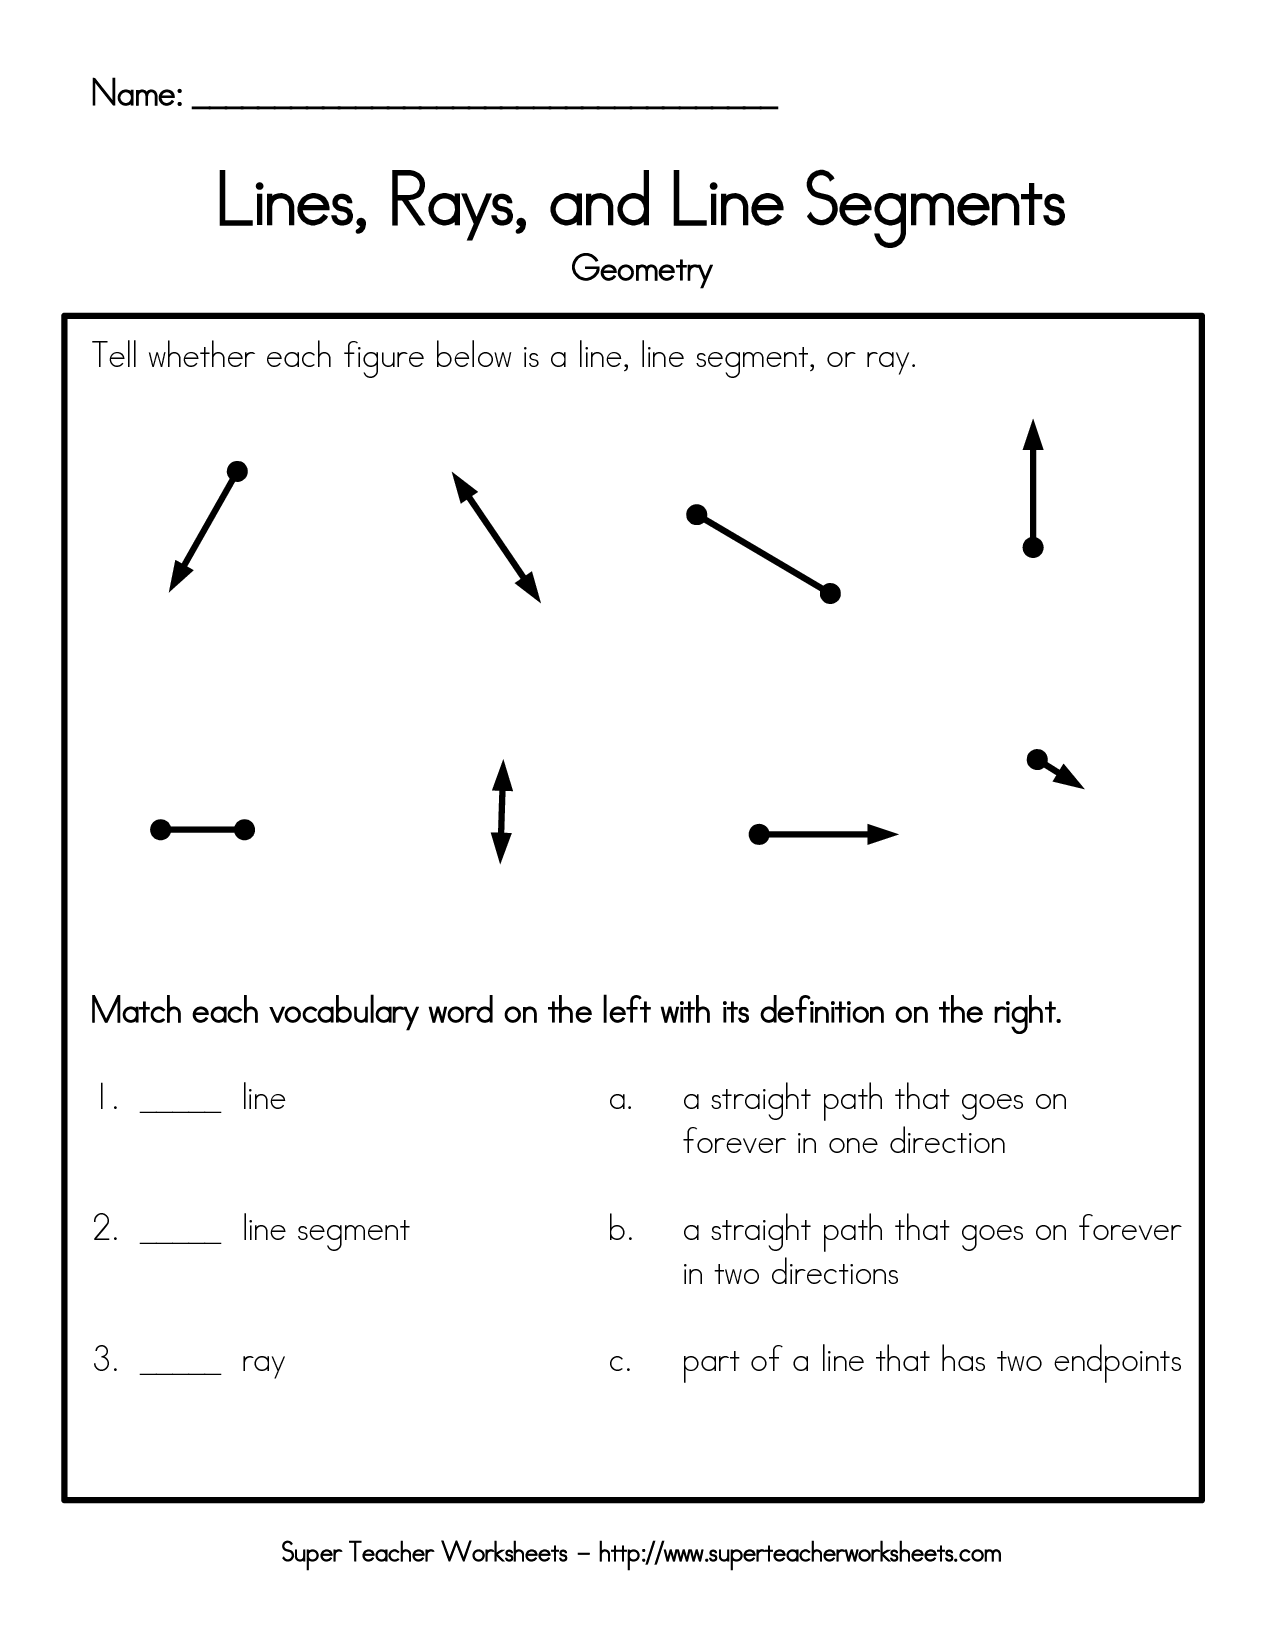 14 Best Images of Geometric Lines Worksheets